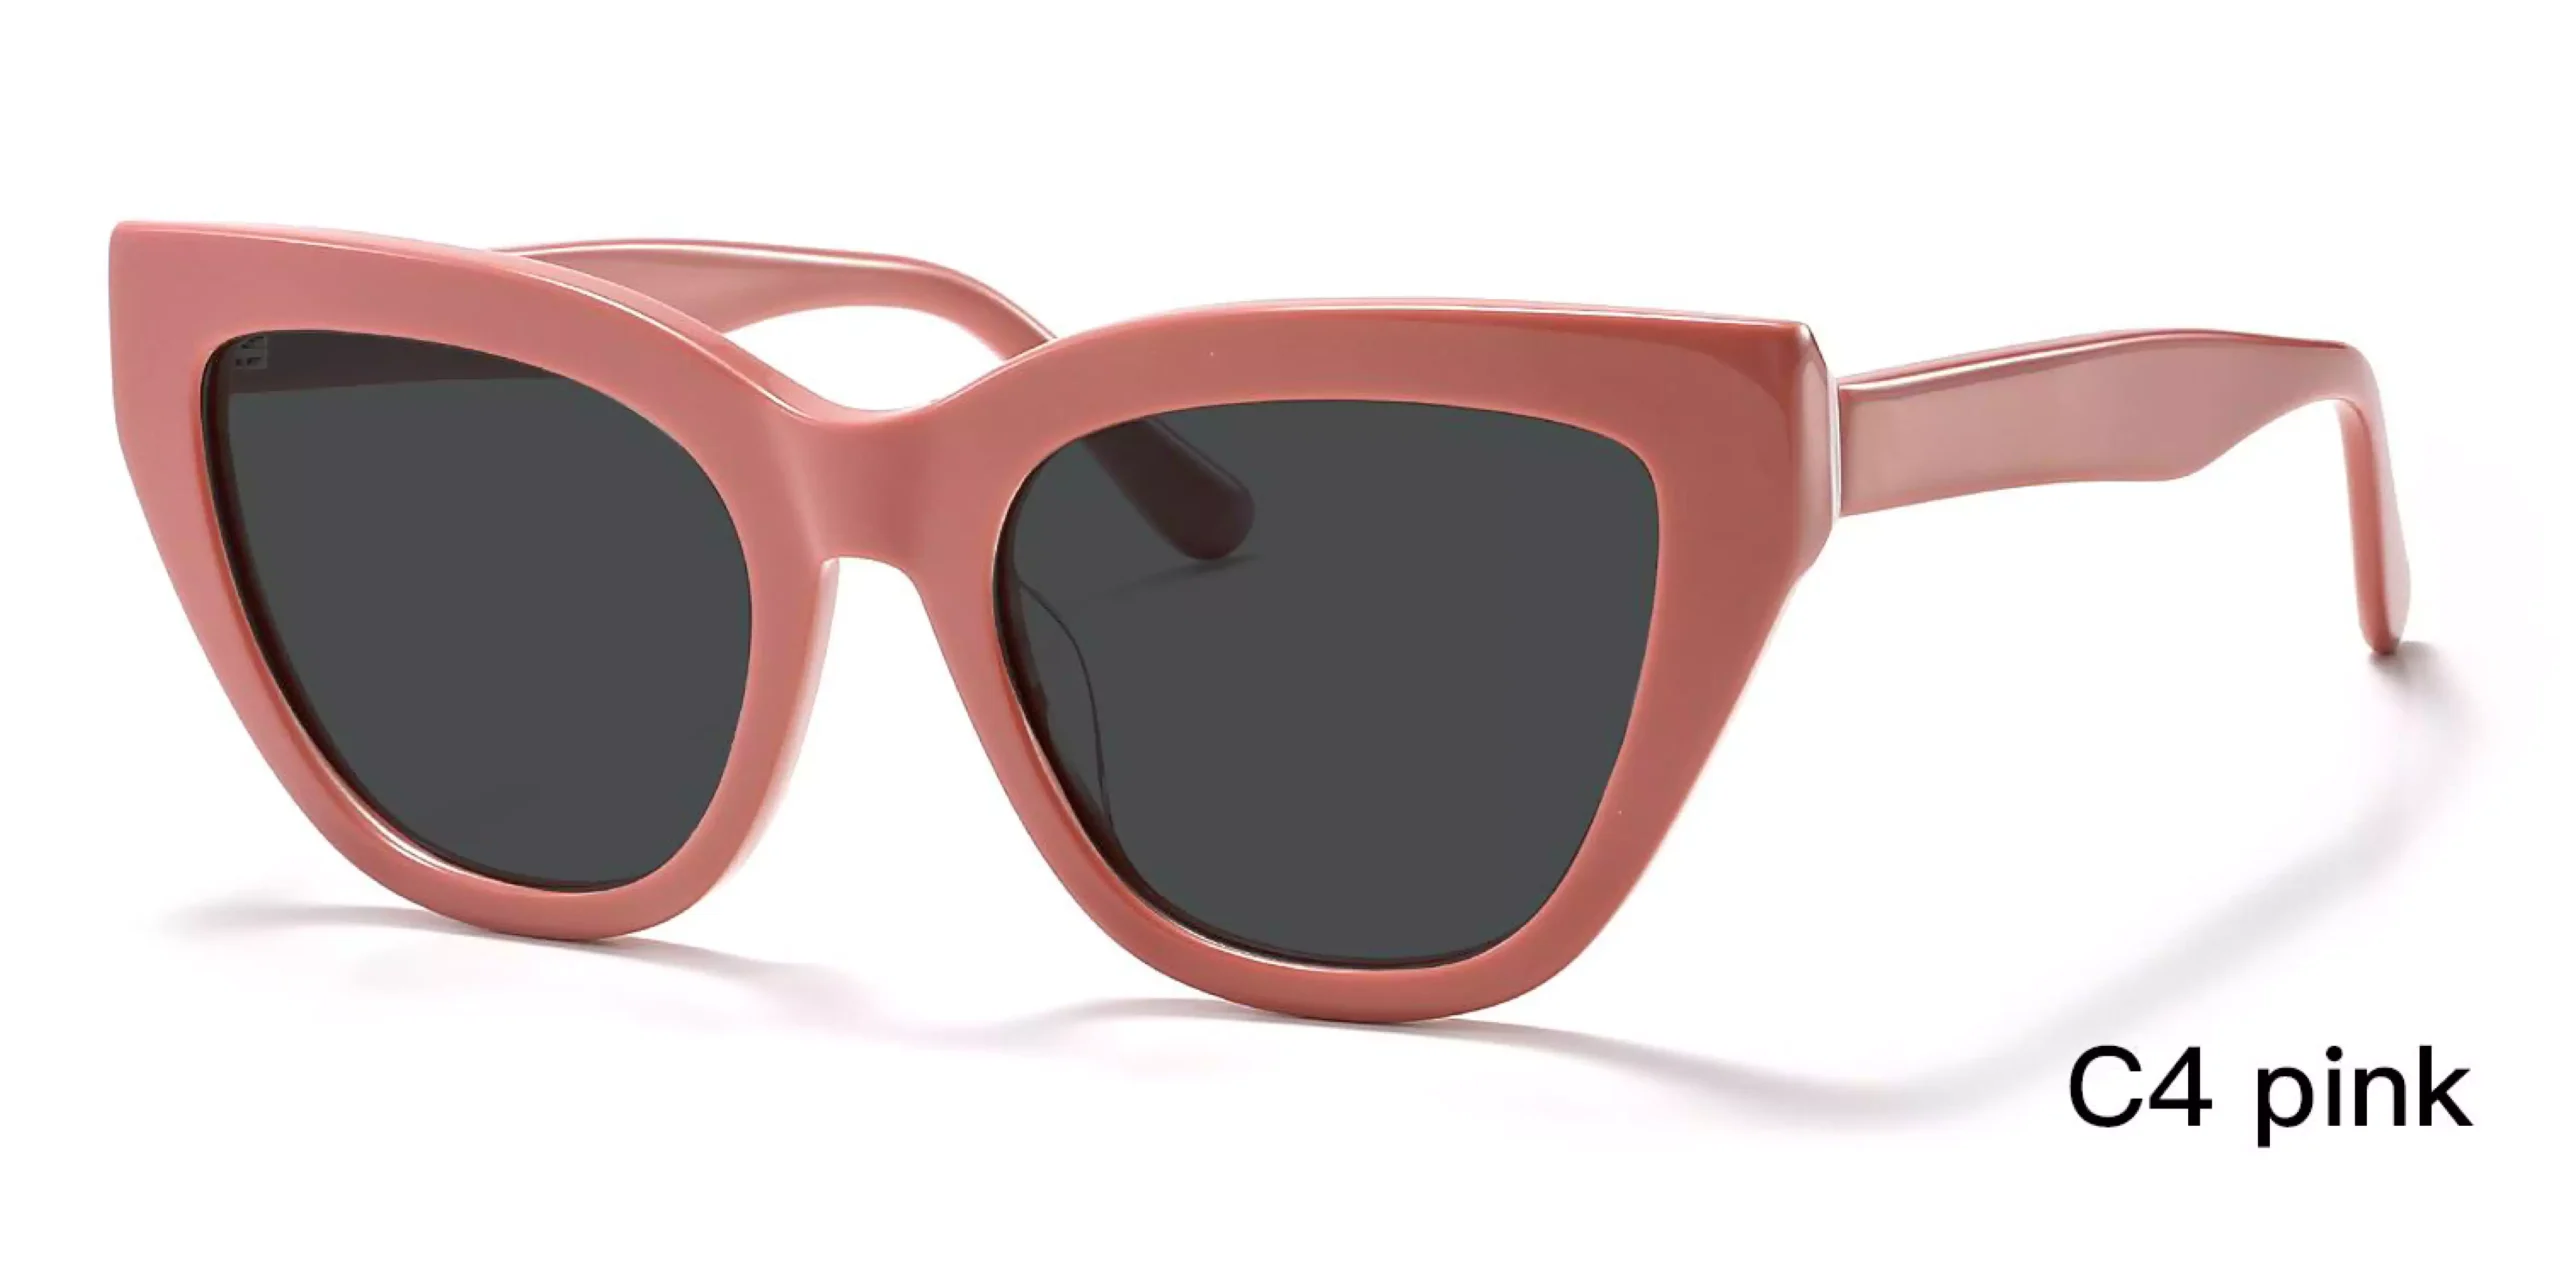 Wholesale Cat Eye Sunglasses, Pink, UV protection, acetate, affordable sunglasses, care vision